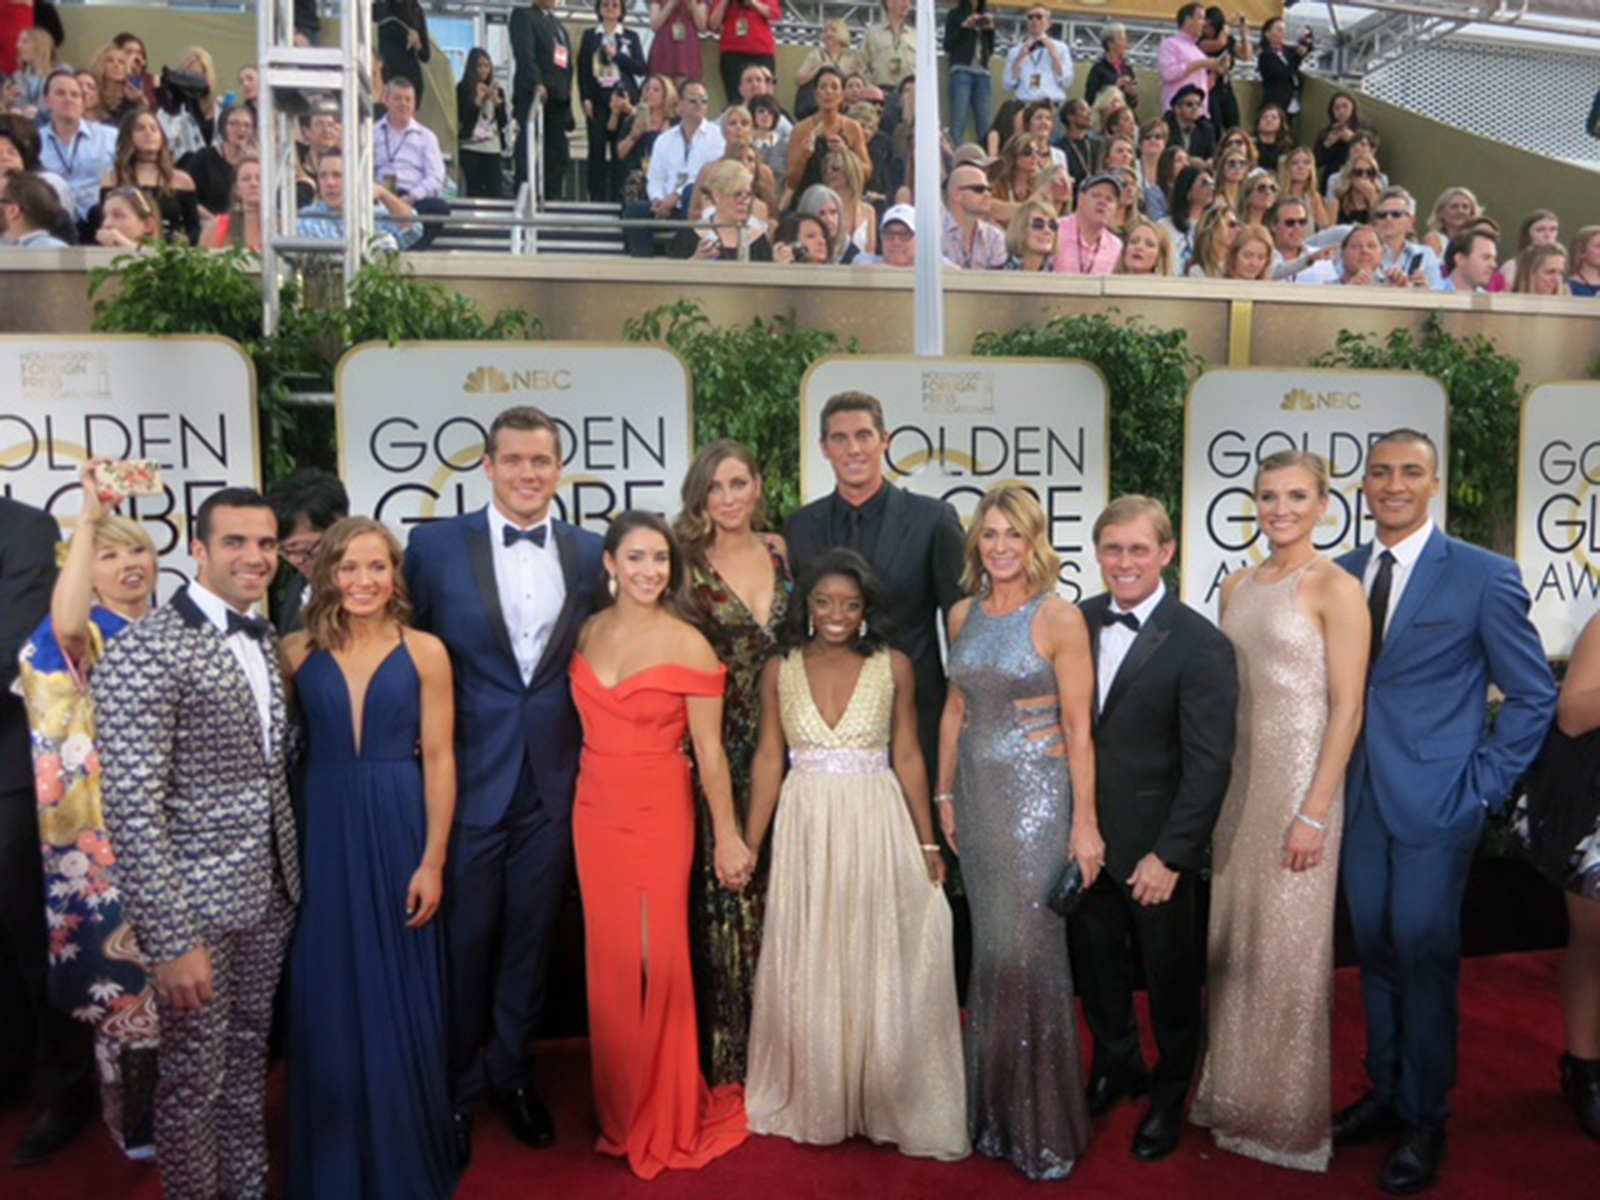 Olympic Champions Danell J. Leyva, Madison Kocian, Football Player Colton Underwood, Olympic Champions Aly Raisman, Guest, Conor Dwyer, Simone Biles, Nadia Comaneci, Bart Conner, Brianne Theisen-Eaton and Ashton Eaton at the Golden Globes (2017).